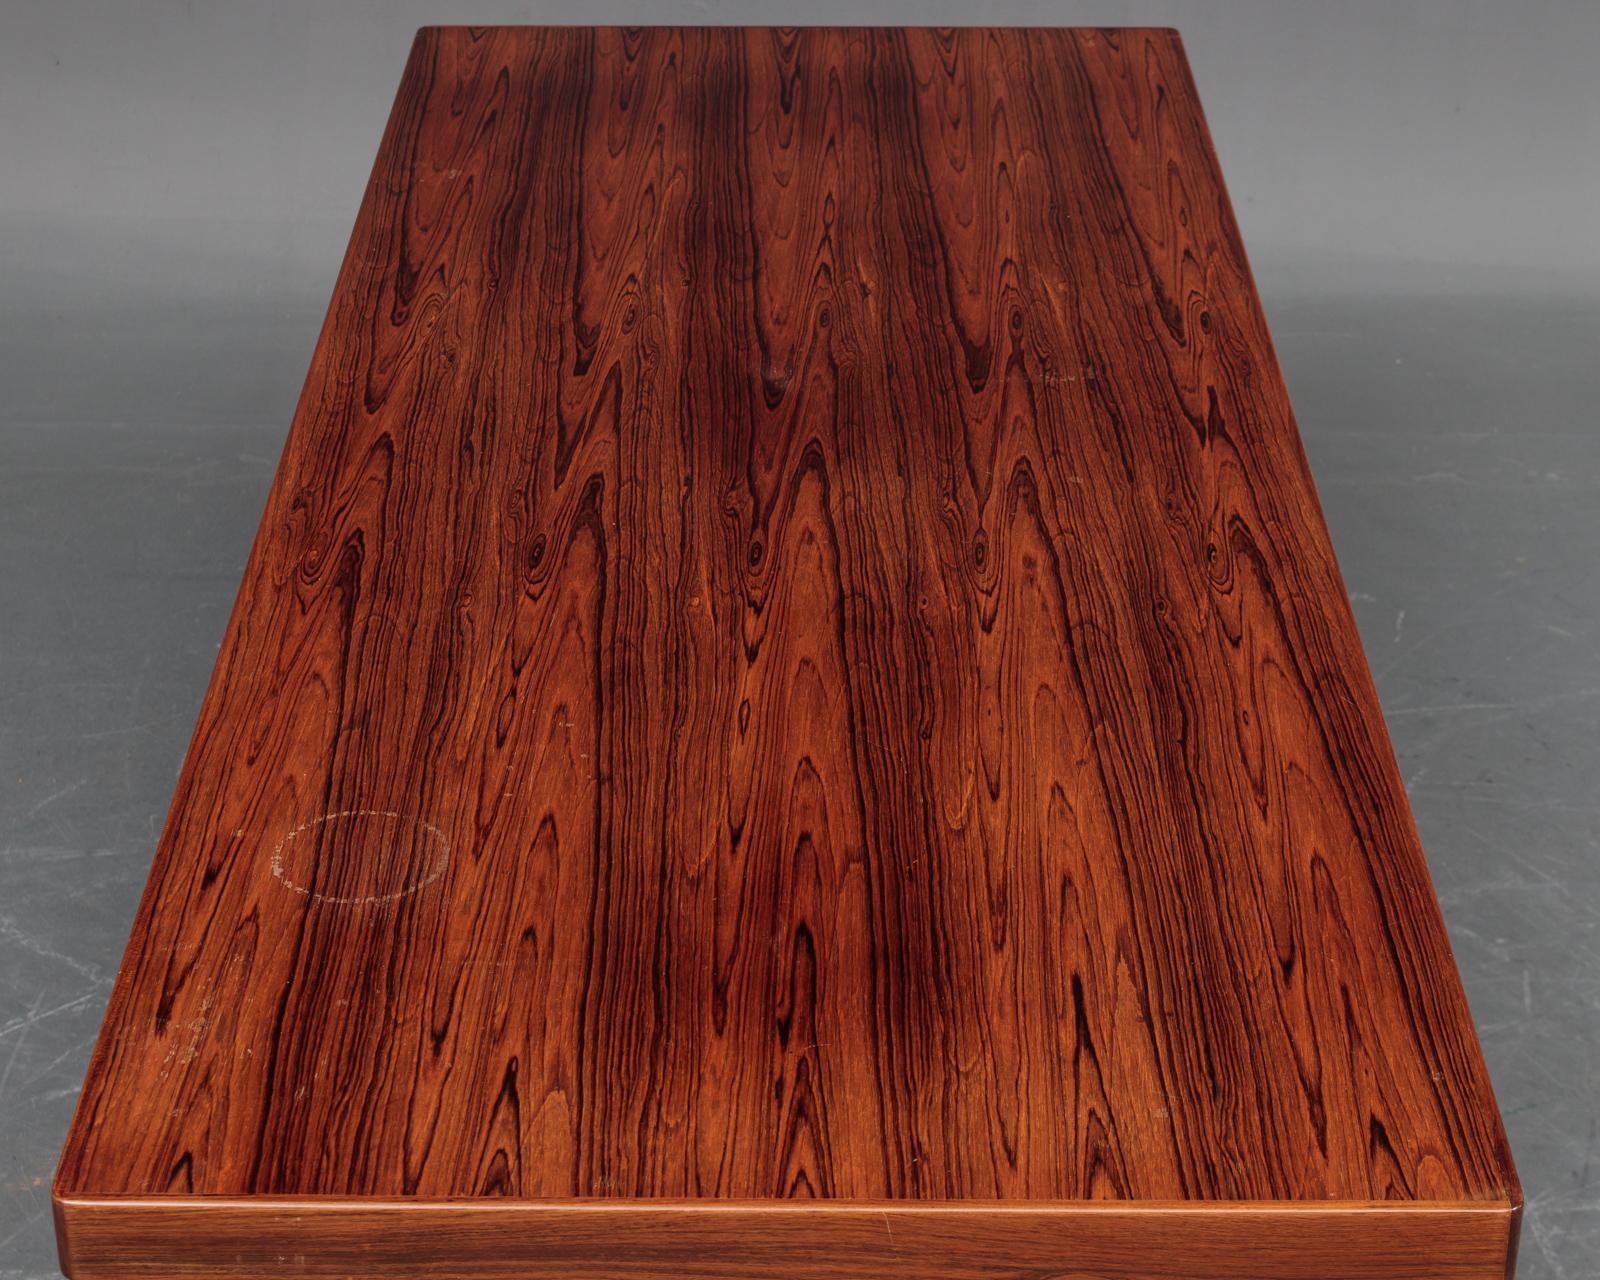 Danish Coffee table made of fine rosewood by Danish furniture manufacturer. Excellent professionally restored condition. Top has been refinished and water mark removed since photos.